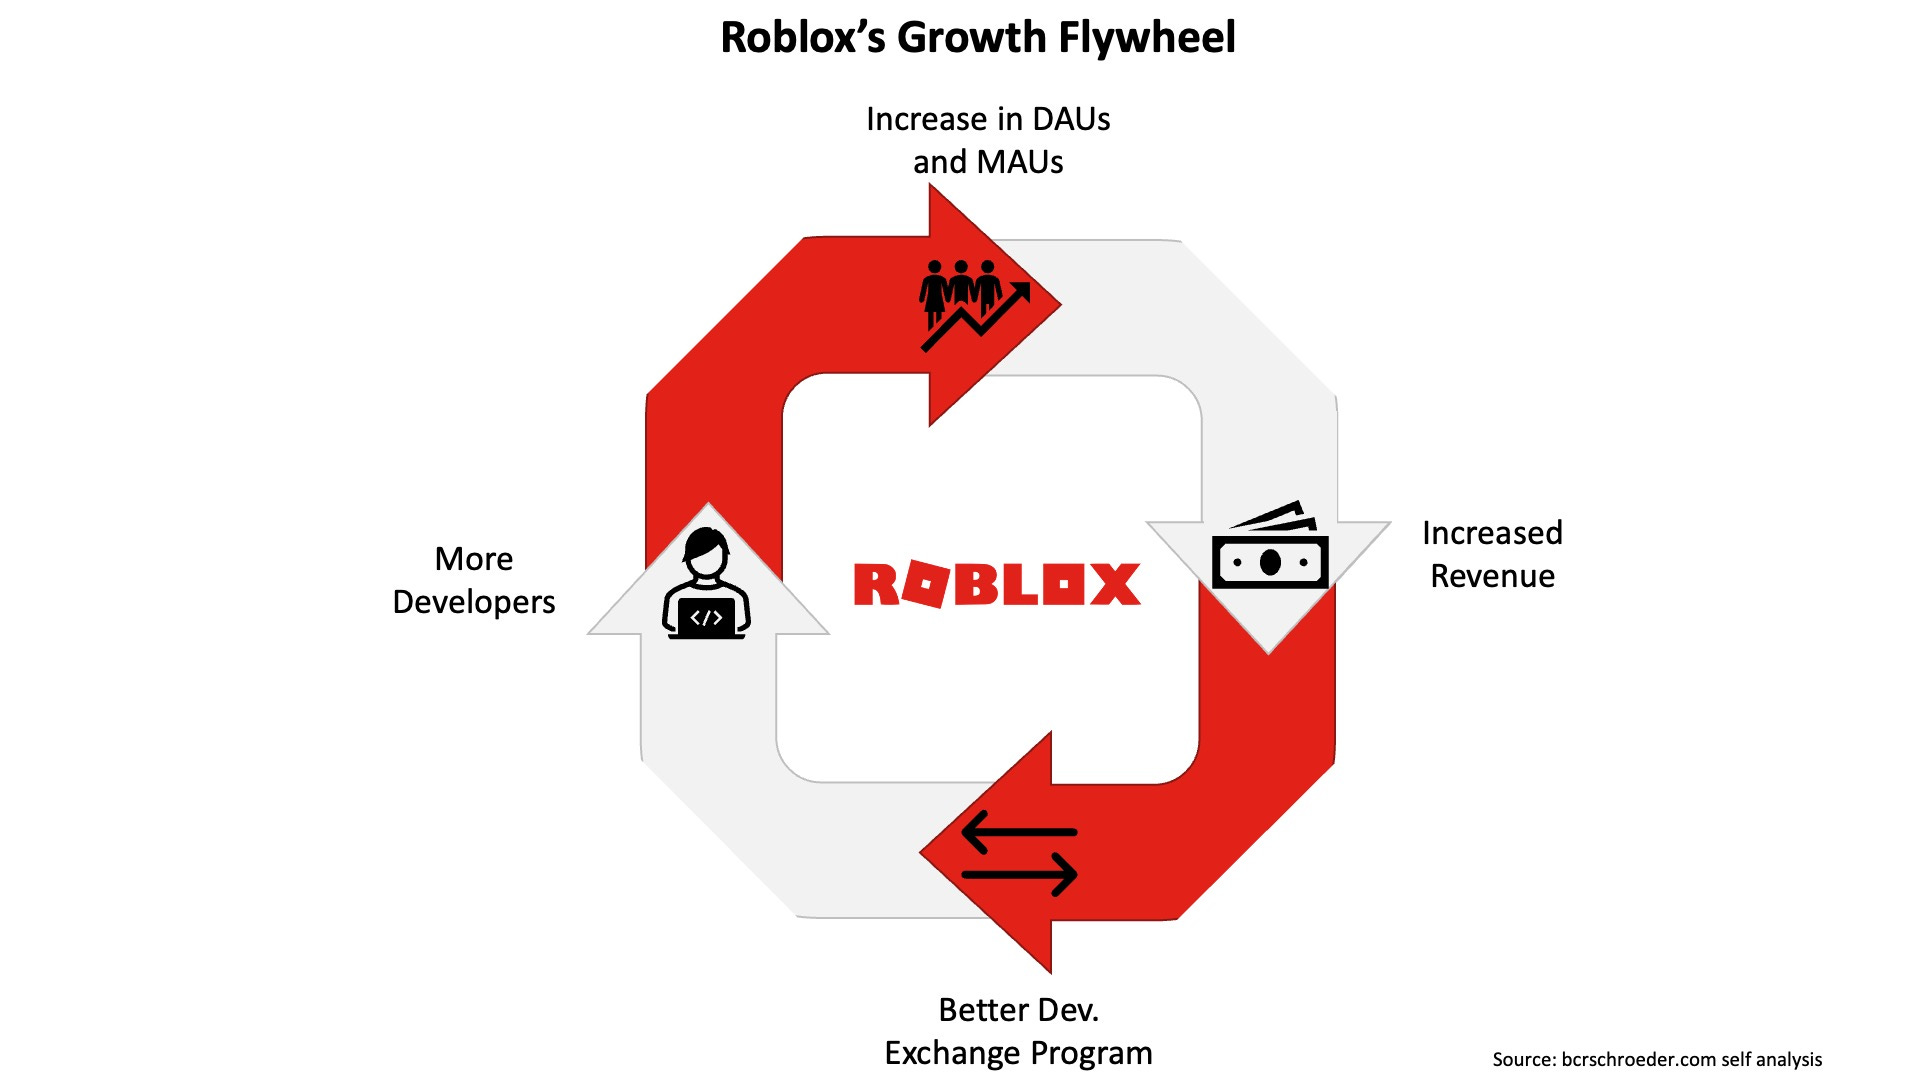 Roblox bolstering game's economy by allowing developers to offer  subscriptions - Interpret